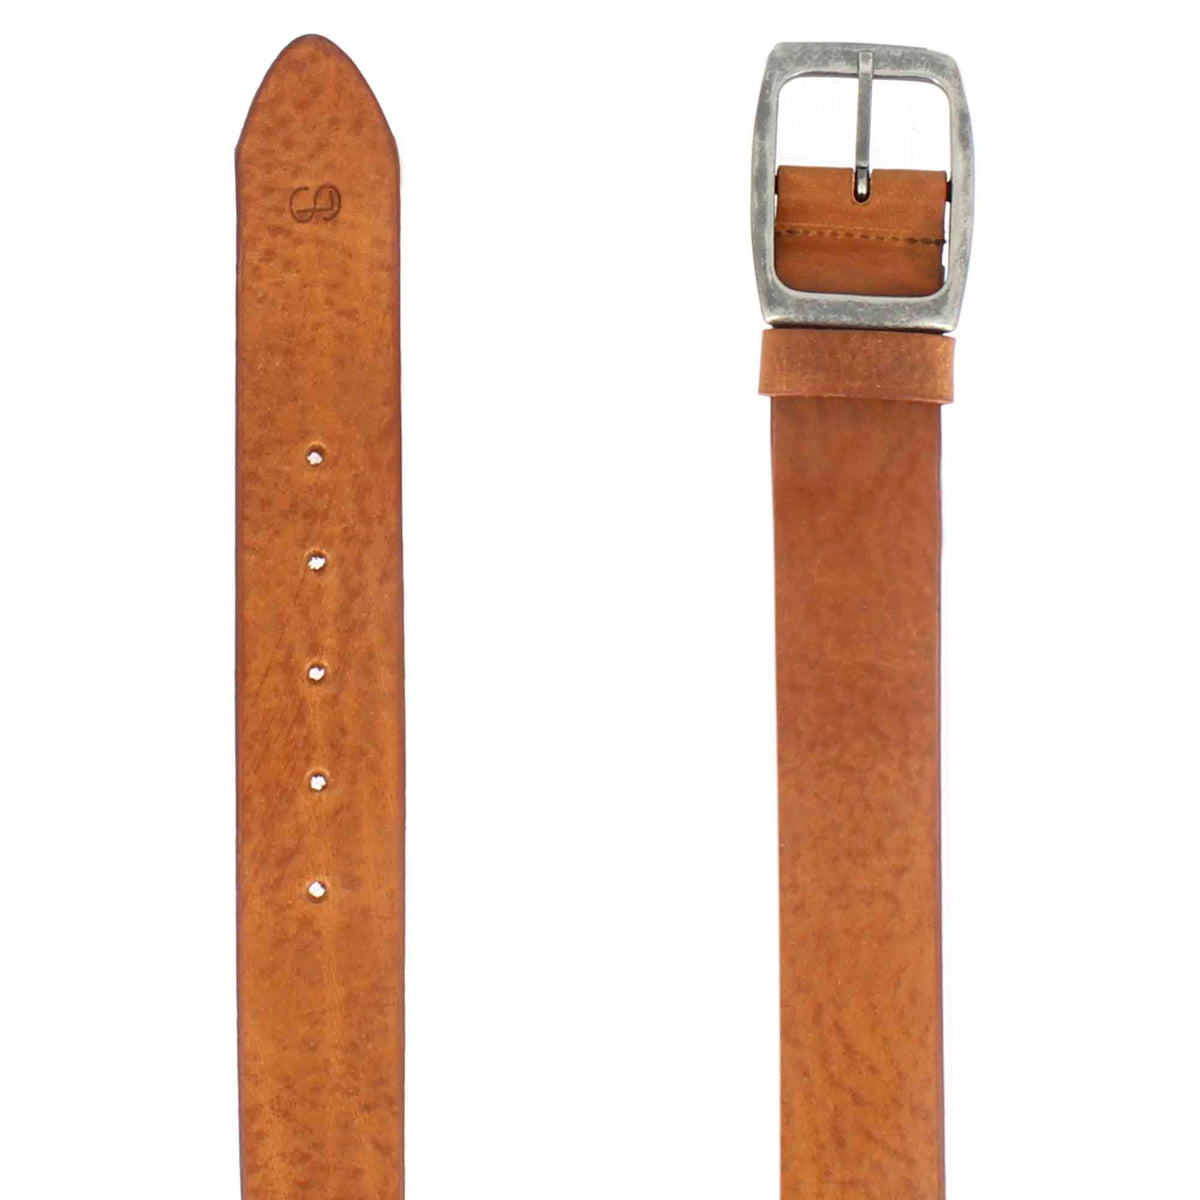 Classic men's belt in light brown leather with buckle